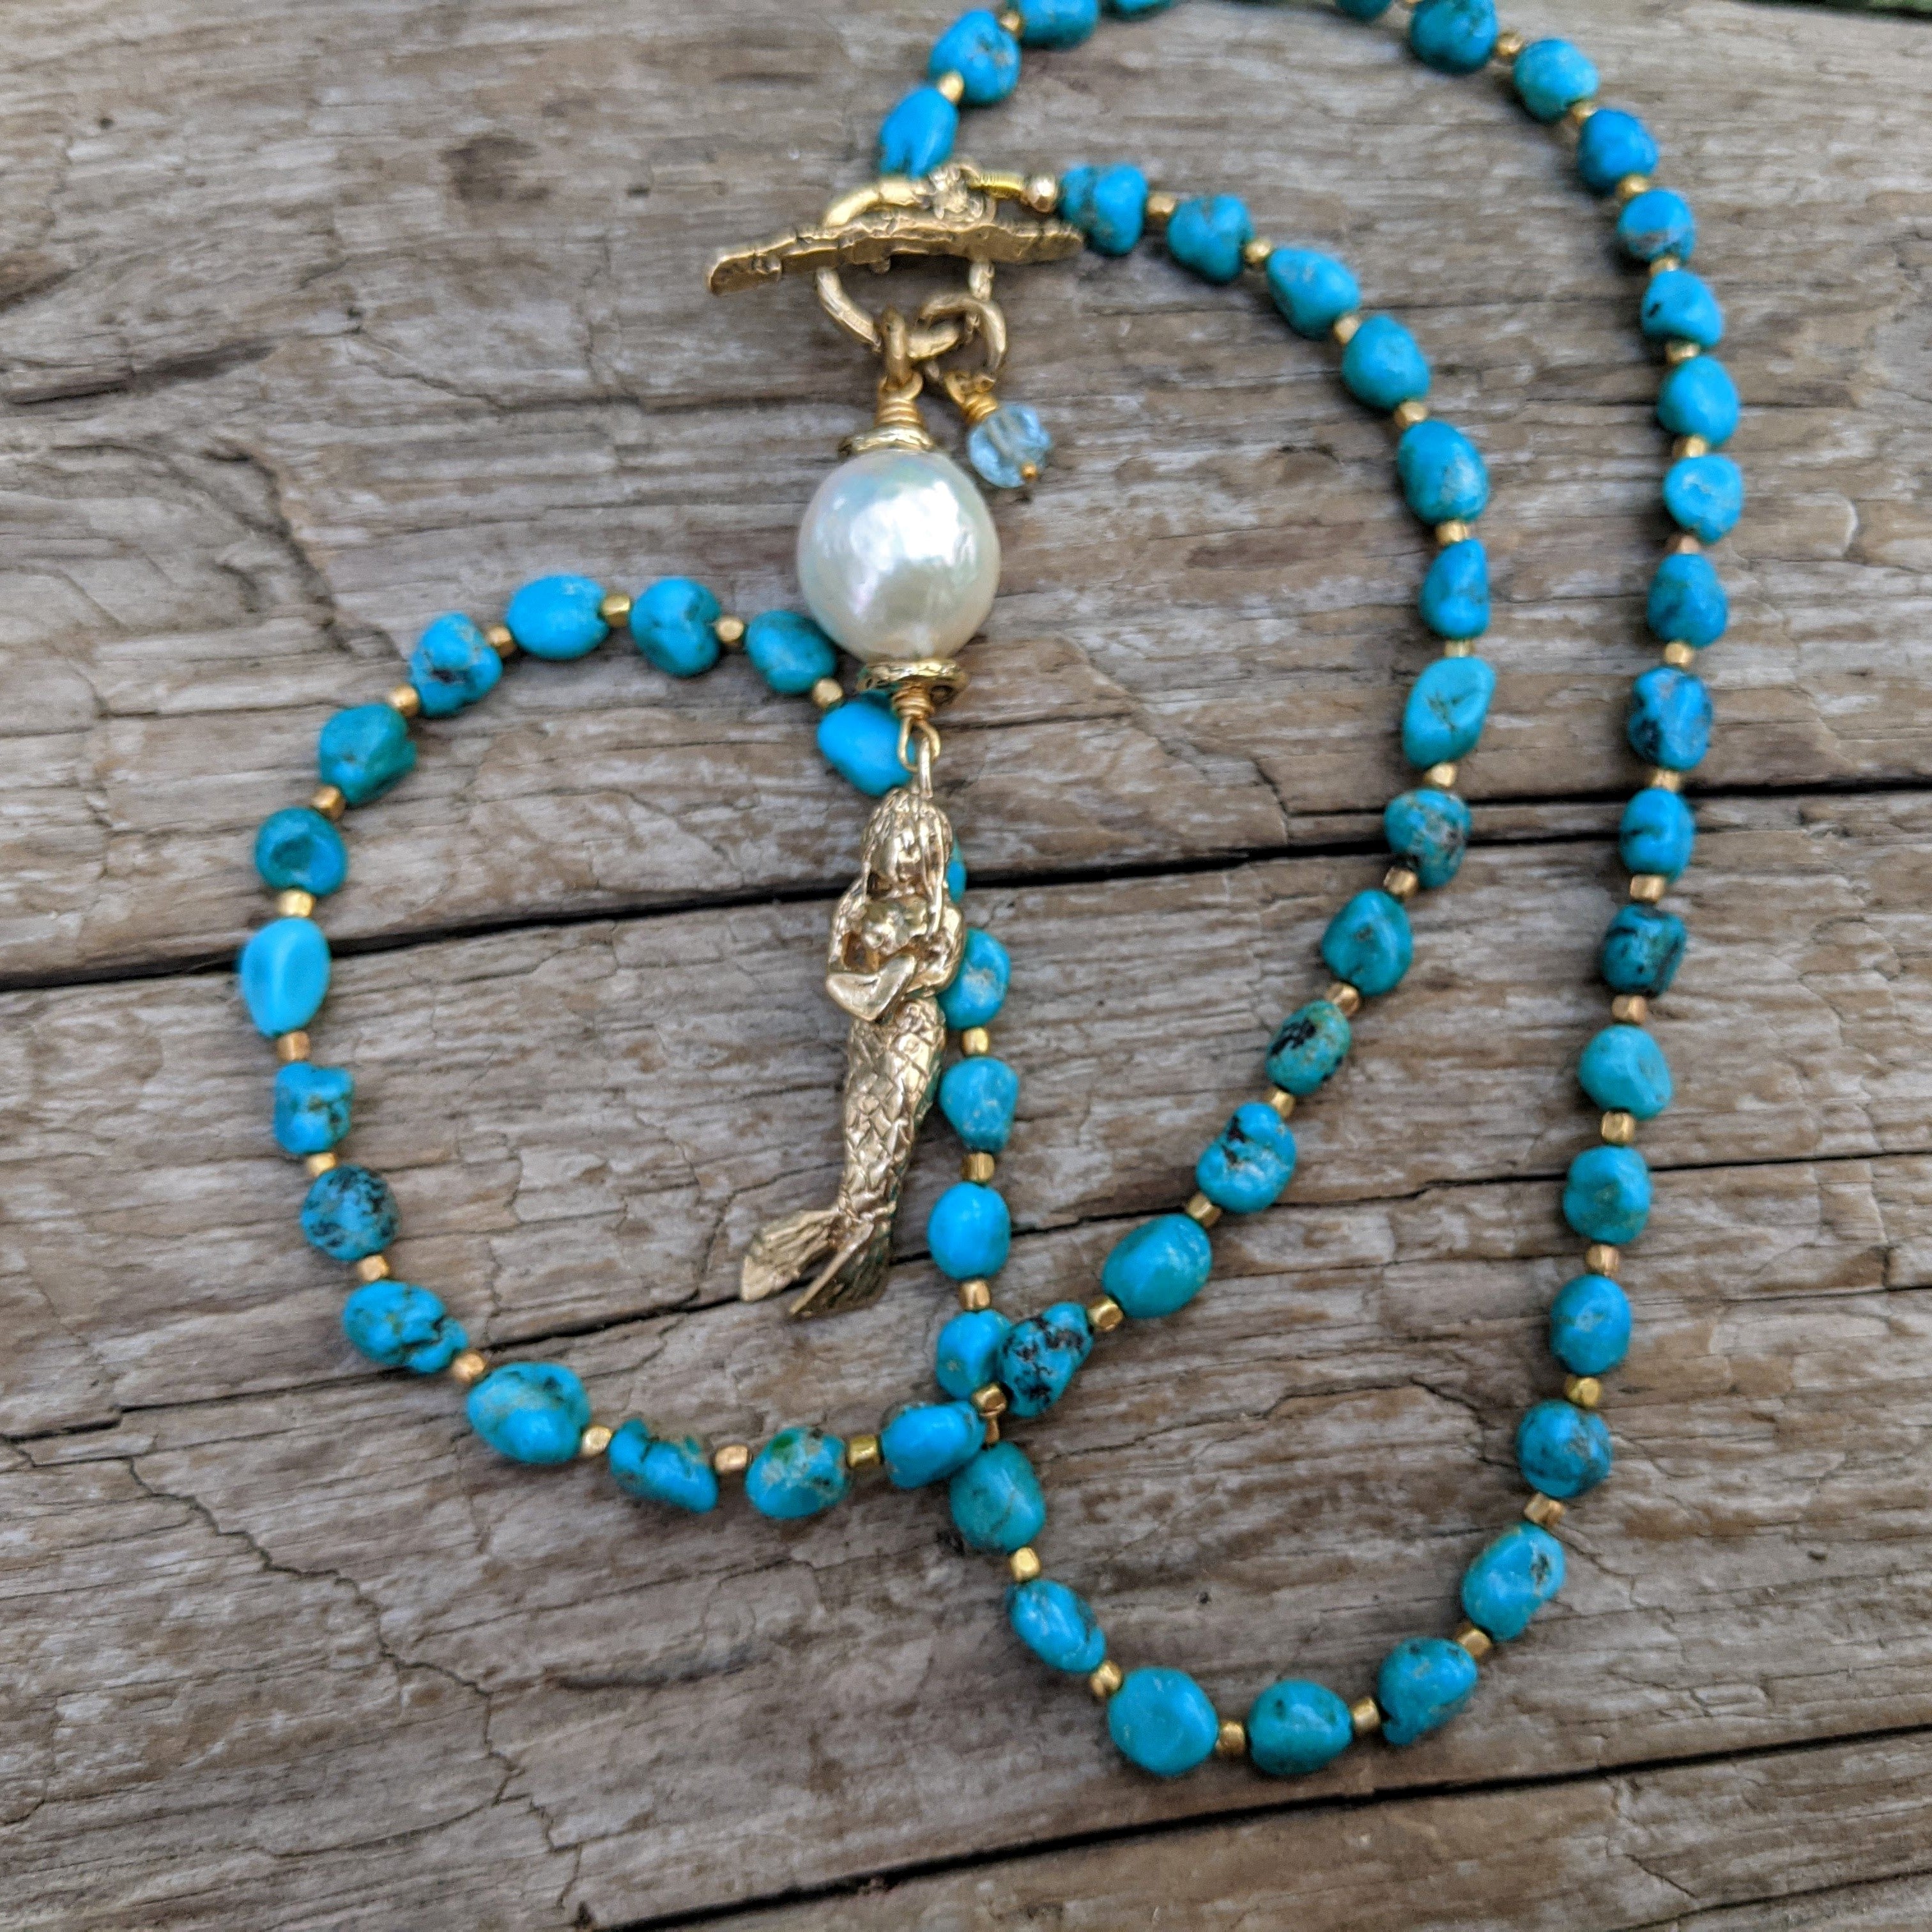 Turquoise necklace, gemstone mermaid necklace, artisan necklace, artistic necklace, boho turquoise necklace. Handcrafted by Aurora Creative Jewellery.